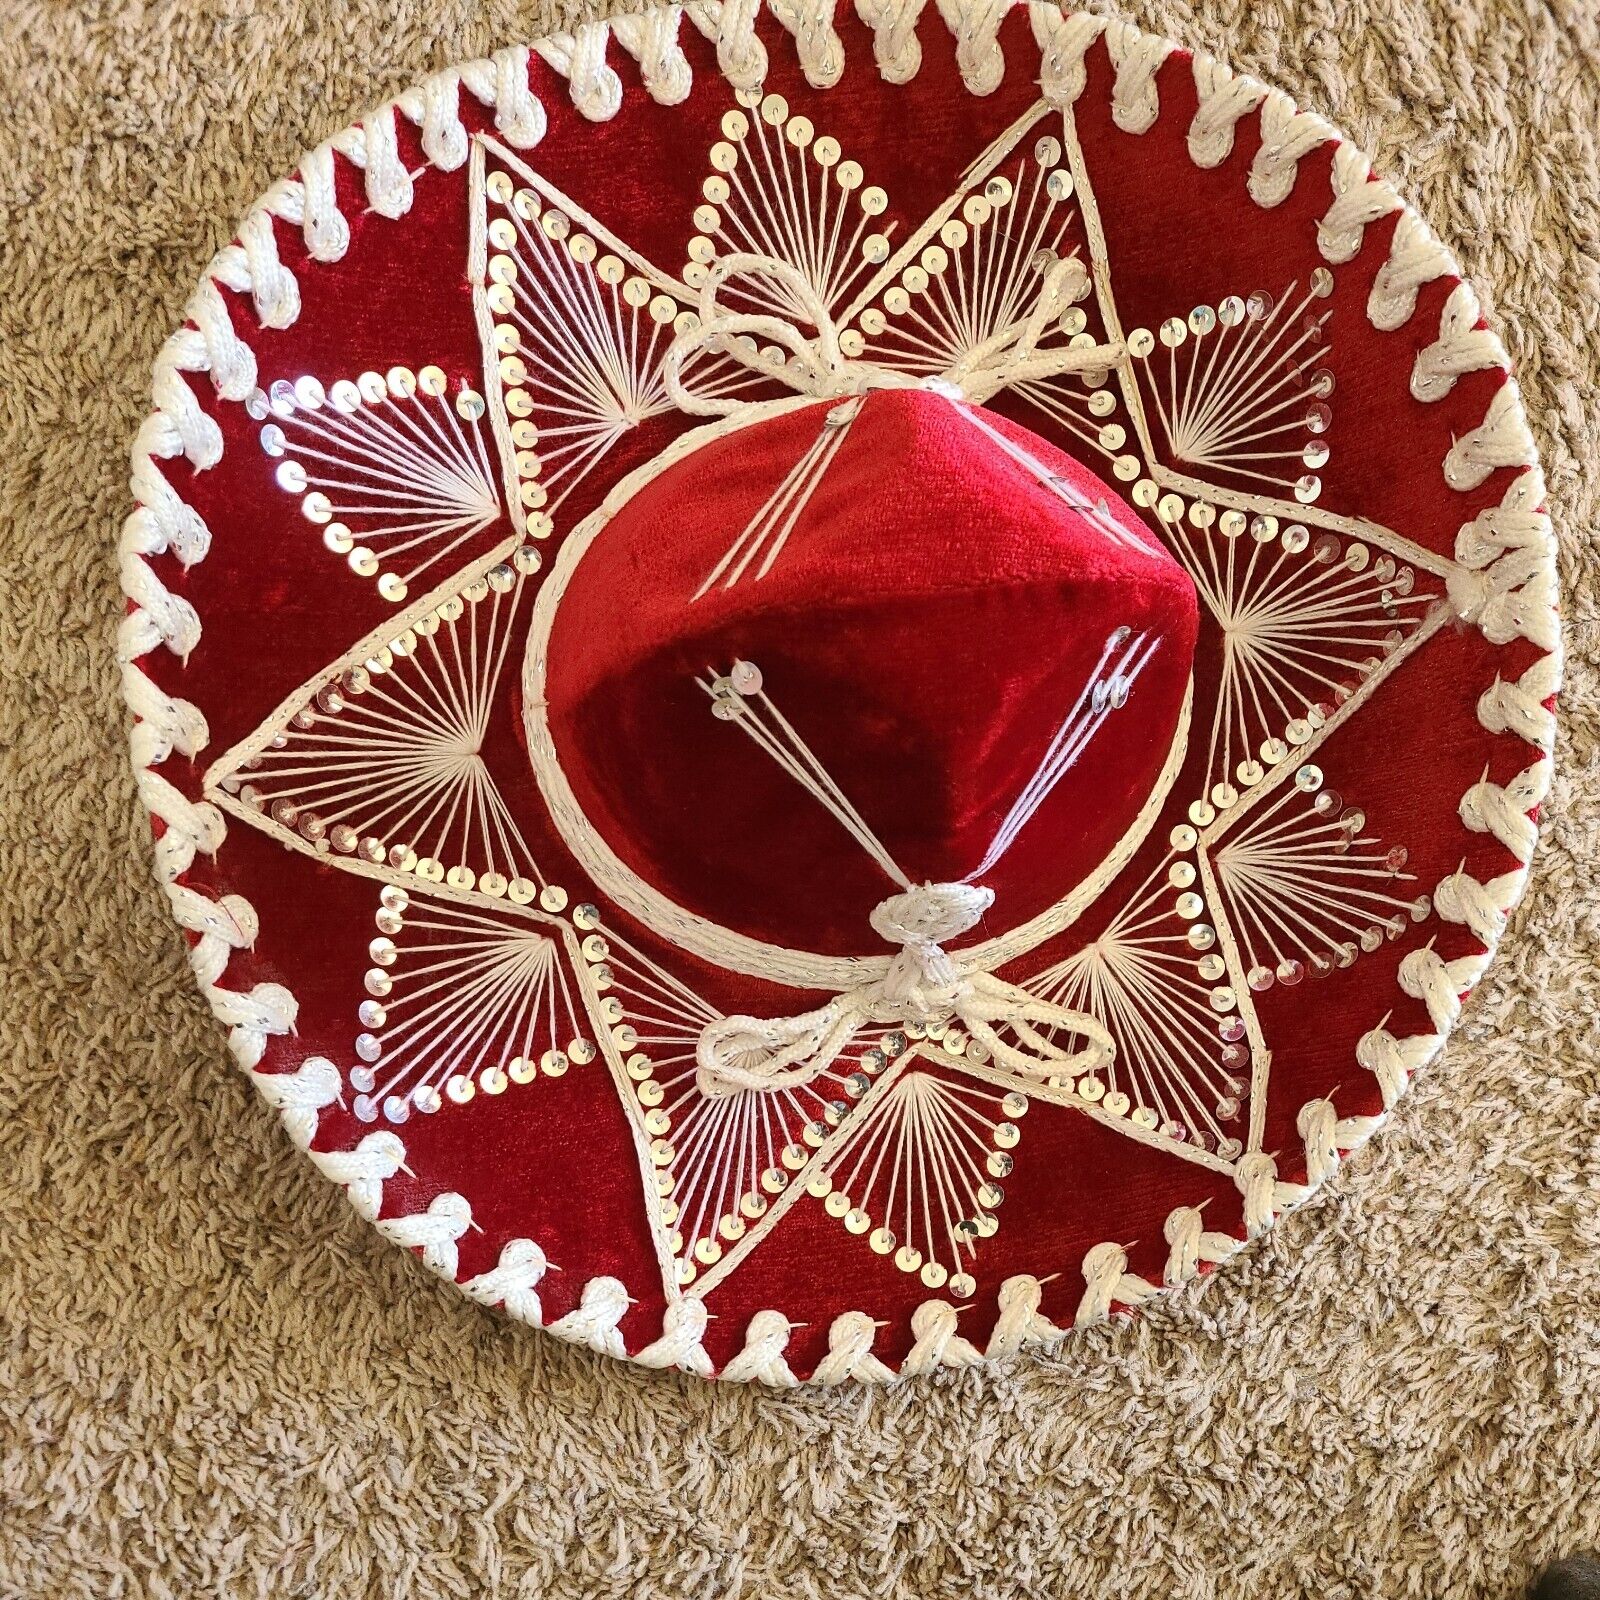  Youth Belri Authentic Mexican Mariachi Sombrero red. Stunning piece